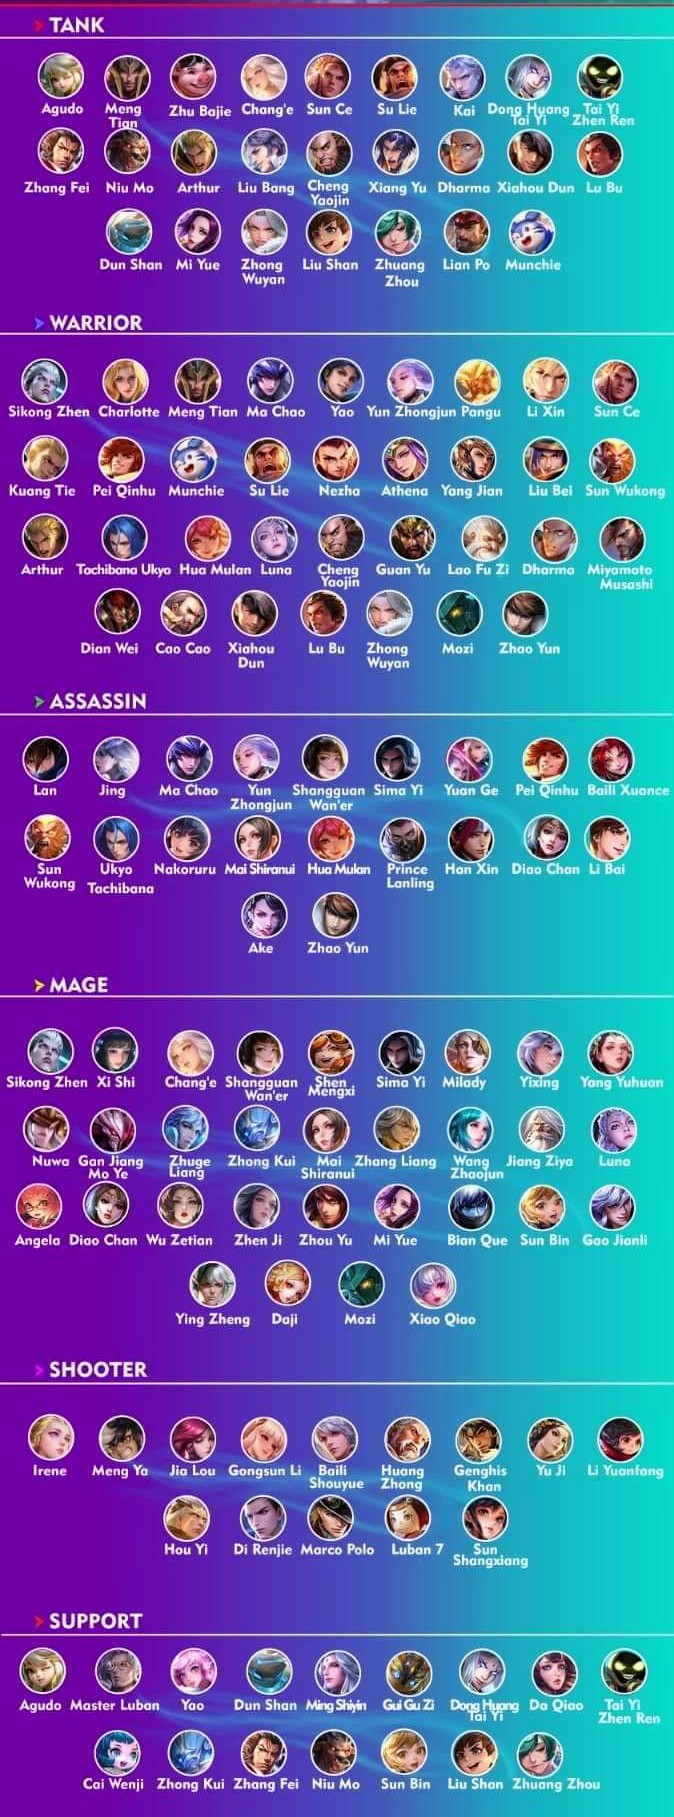 Honor of Kings tier list – Ranking the Best Heroes for Each Class